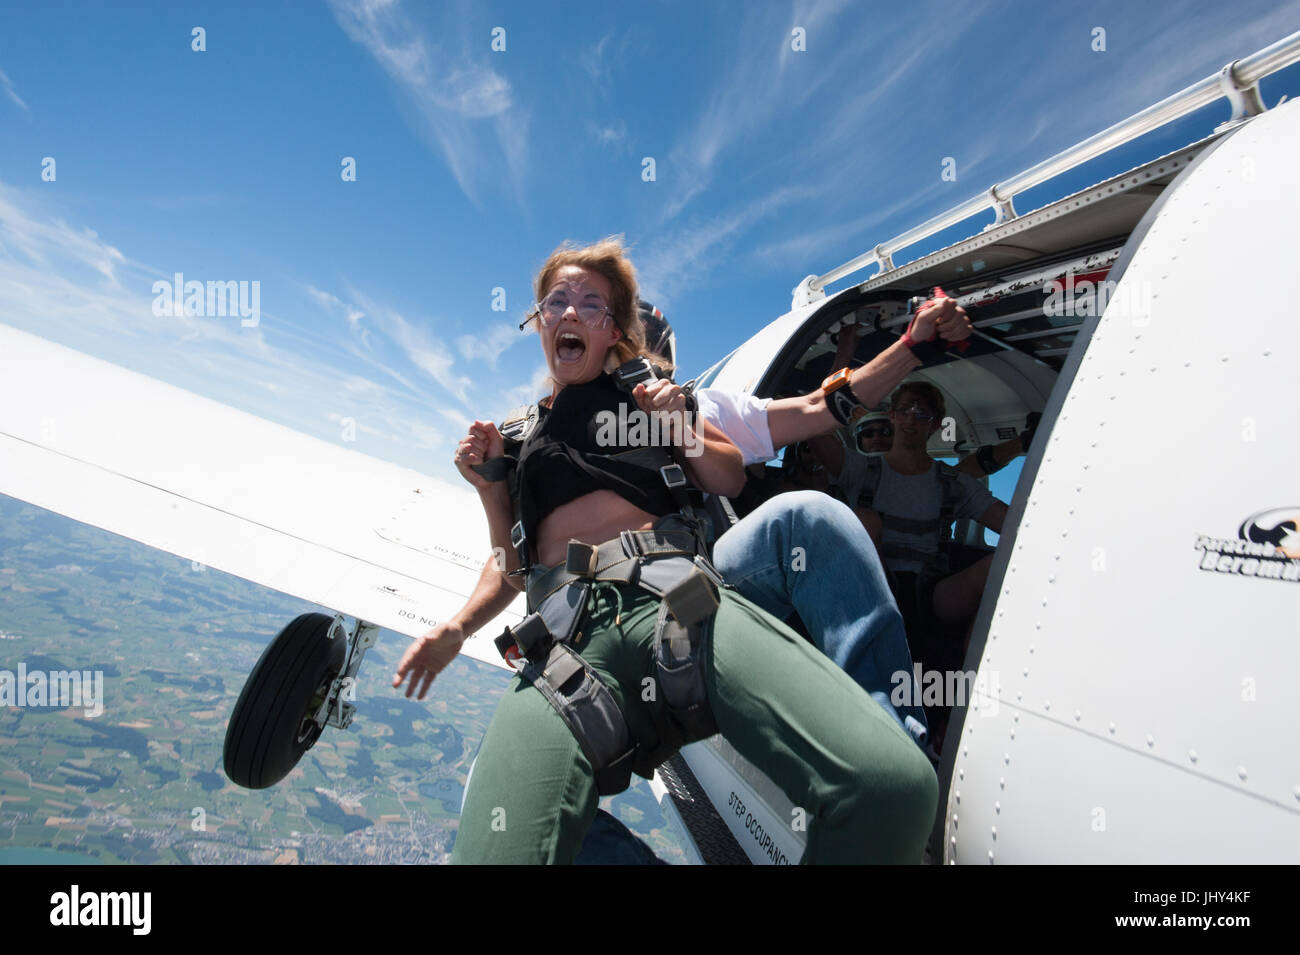 Girl doing a first tandem skydive Stock Photo